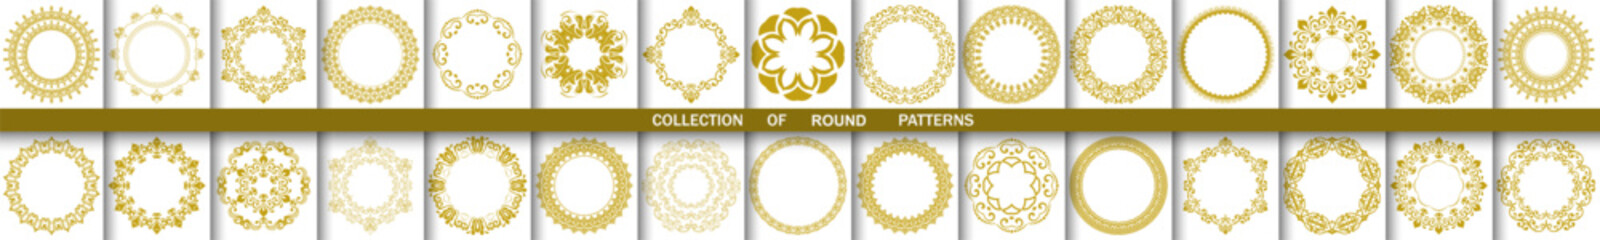 Vintage set of vector round golden elements. Different elements, backgrounds and monograms. Classic patterns. Set of vintage patterns